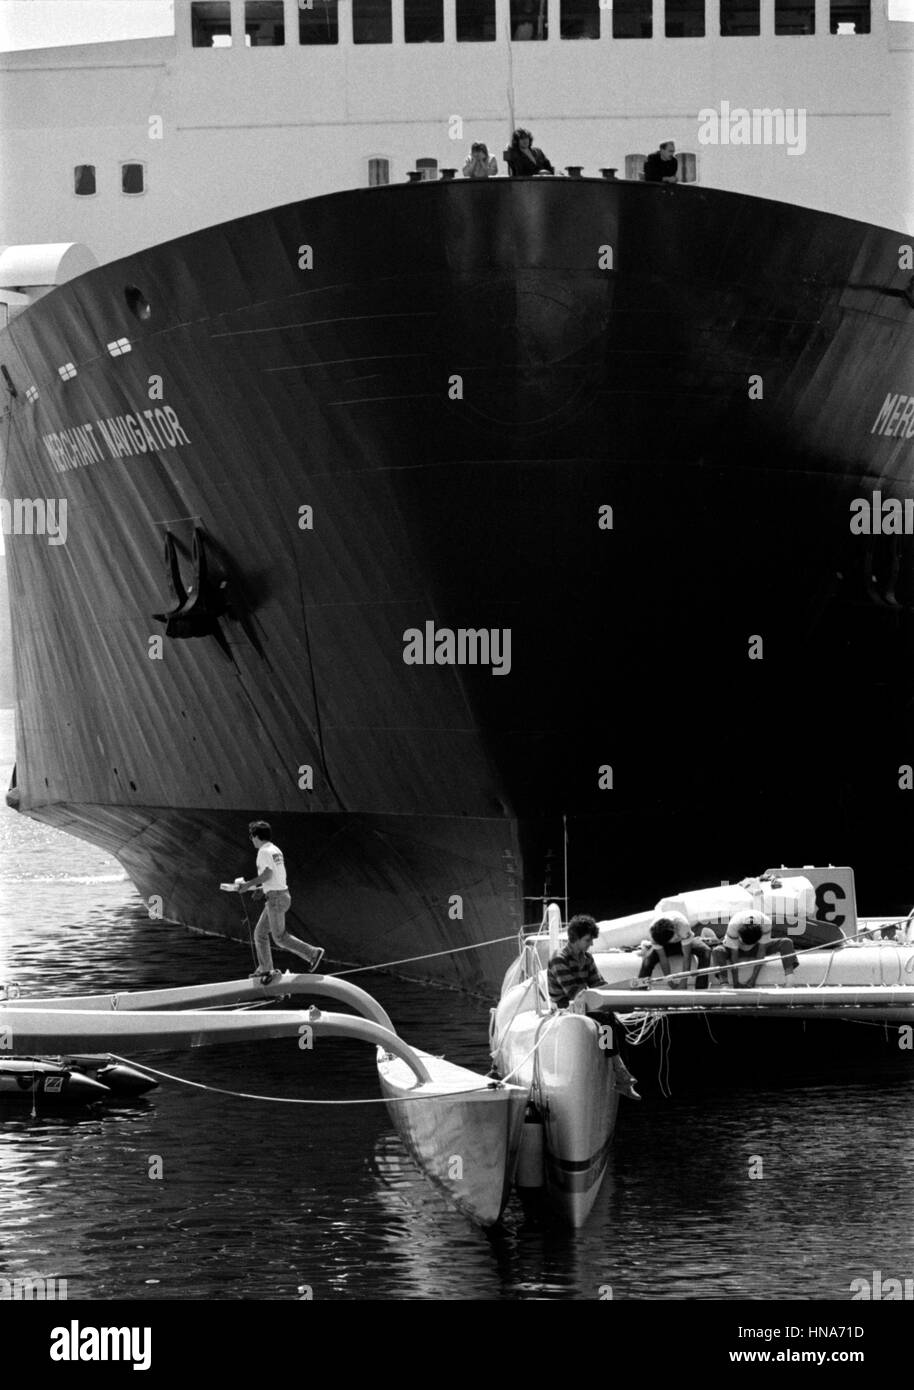 AJAXNETPHOTO. 1 JUNE,1984.PLYMOUTH, ENGLAND. -OSTAR RACE-  CREW OF FREIGHTER MERCHANT VENTURER GET BIRD'S-EYE VIEW OF REPAIRS BEING CARRIED OUT ON RACE YACHTS 33 EXPORT AND BIOTHERM IN MILBAY DOCK. PHOTO:JONATHAN EASTLAND/AJAX  REF:840106 31 Stock Photo